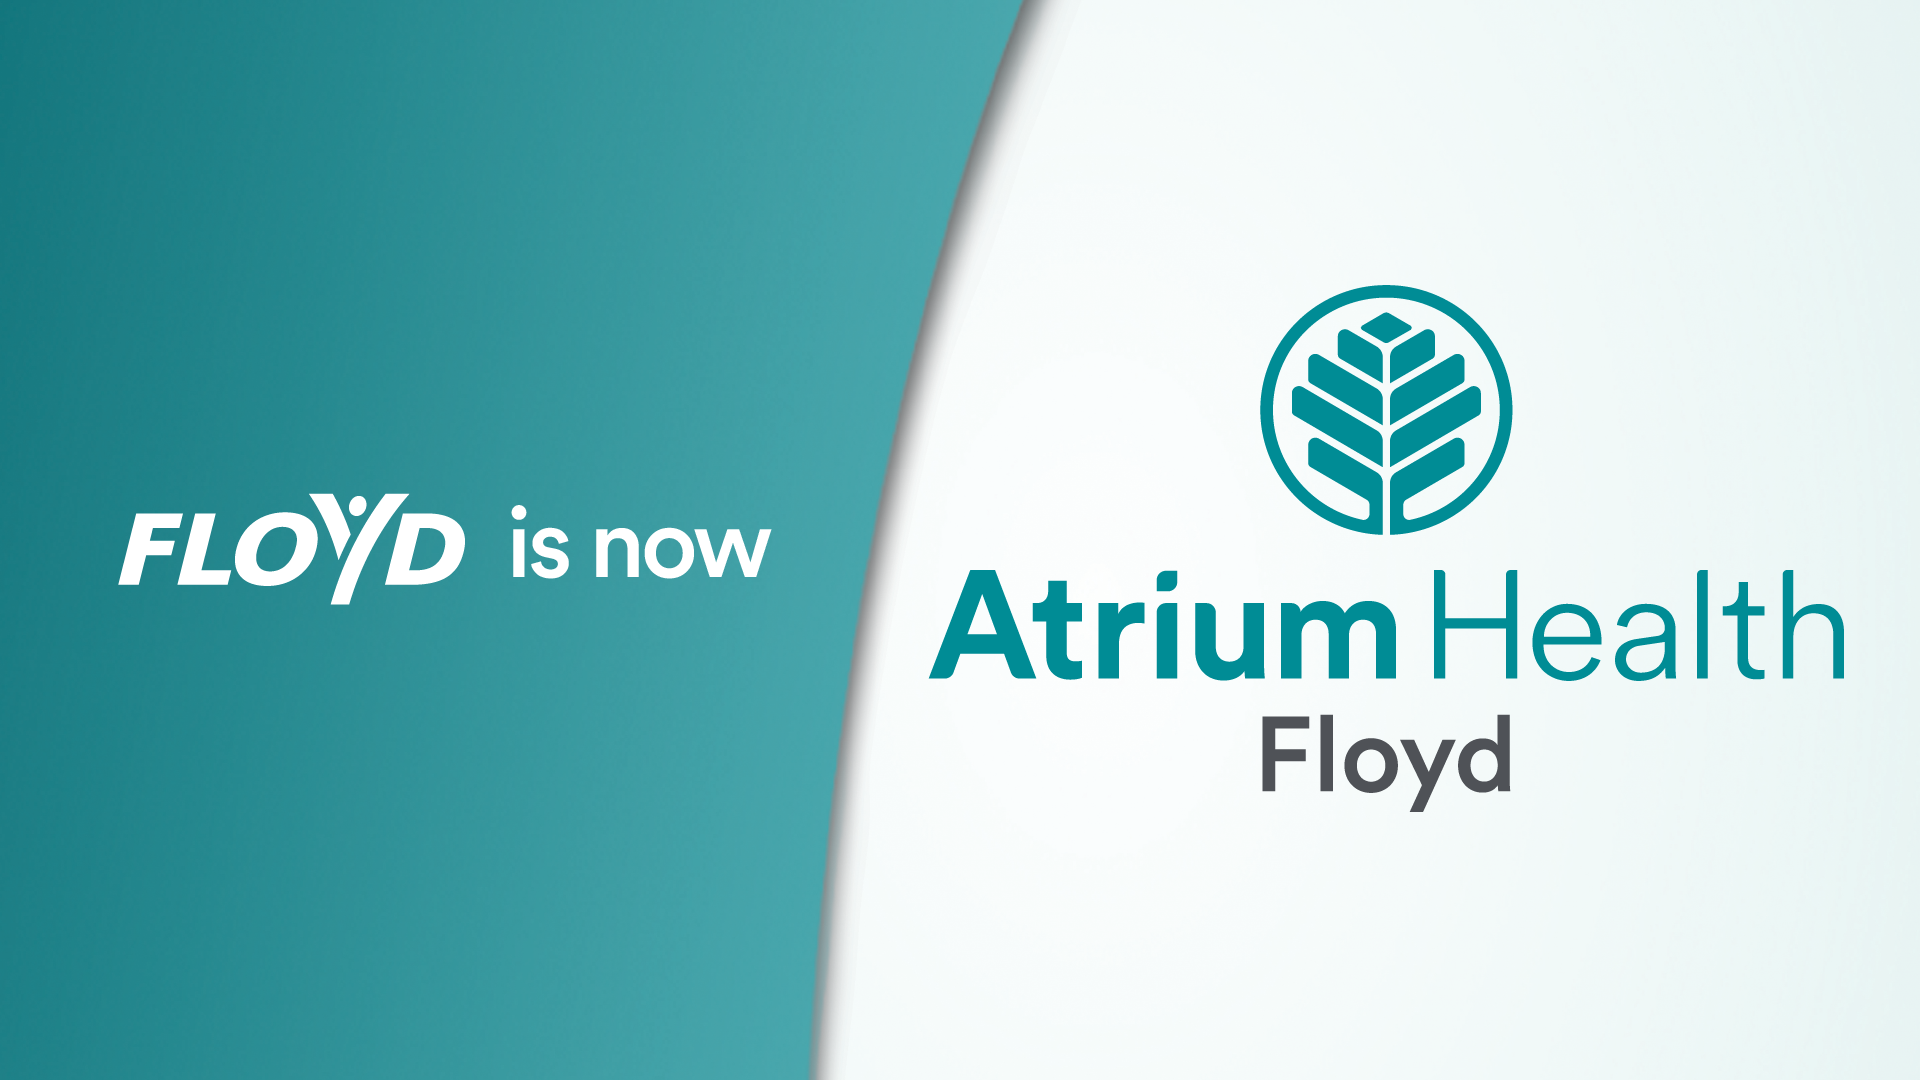 Floyd is now officially Atrium Health Floyd. Today marks the introduction of a new brand resulting from the strategic combination of the Floyd health system and Charlotte, North Carolina-based Atrium Health.